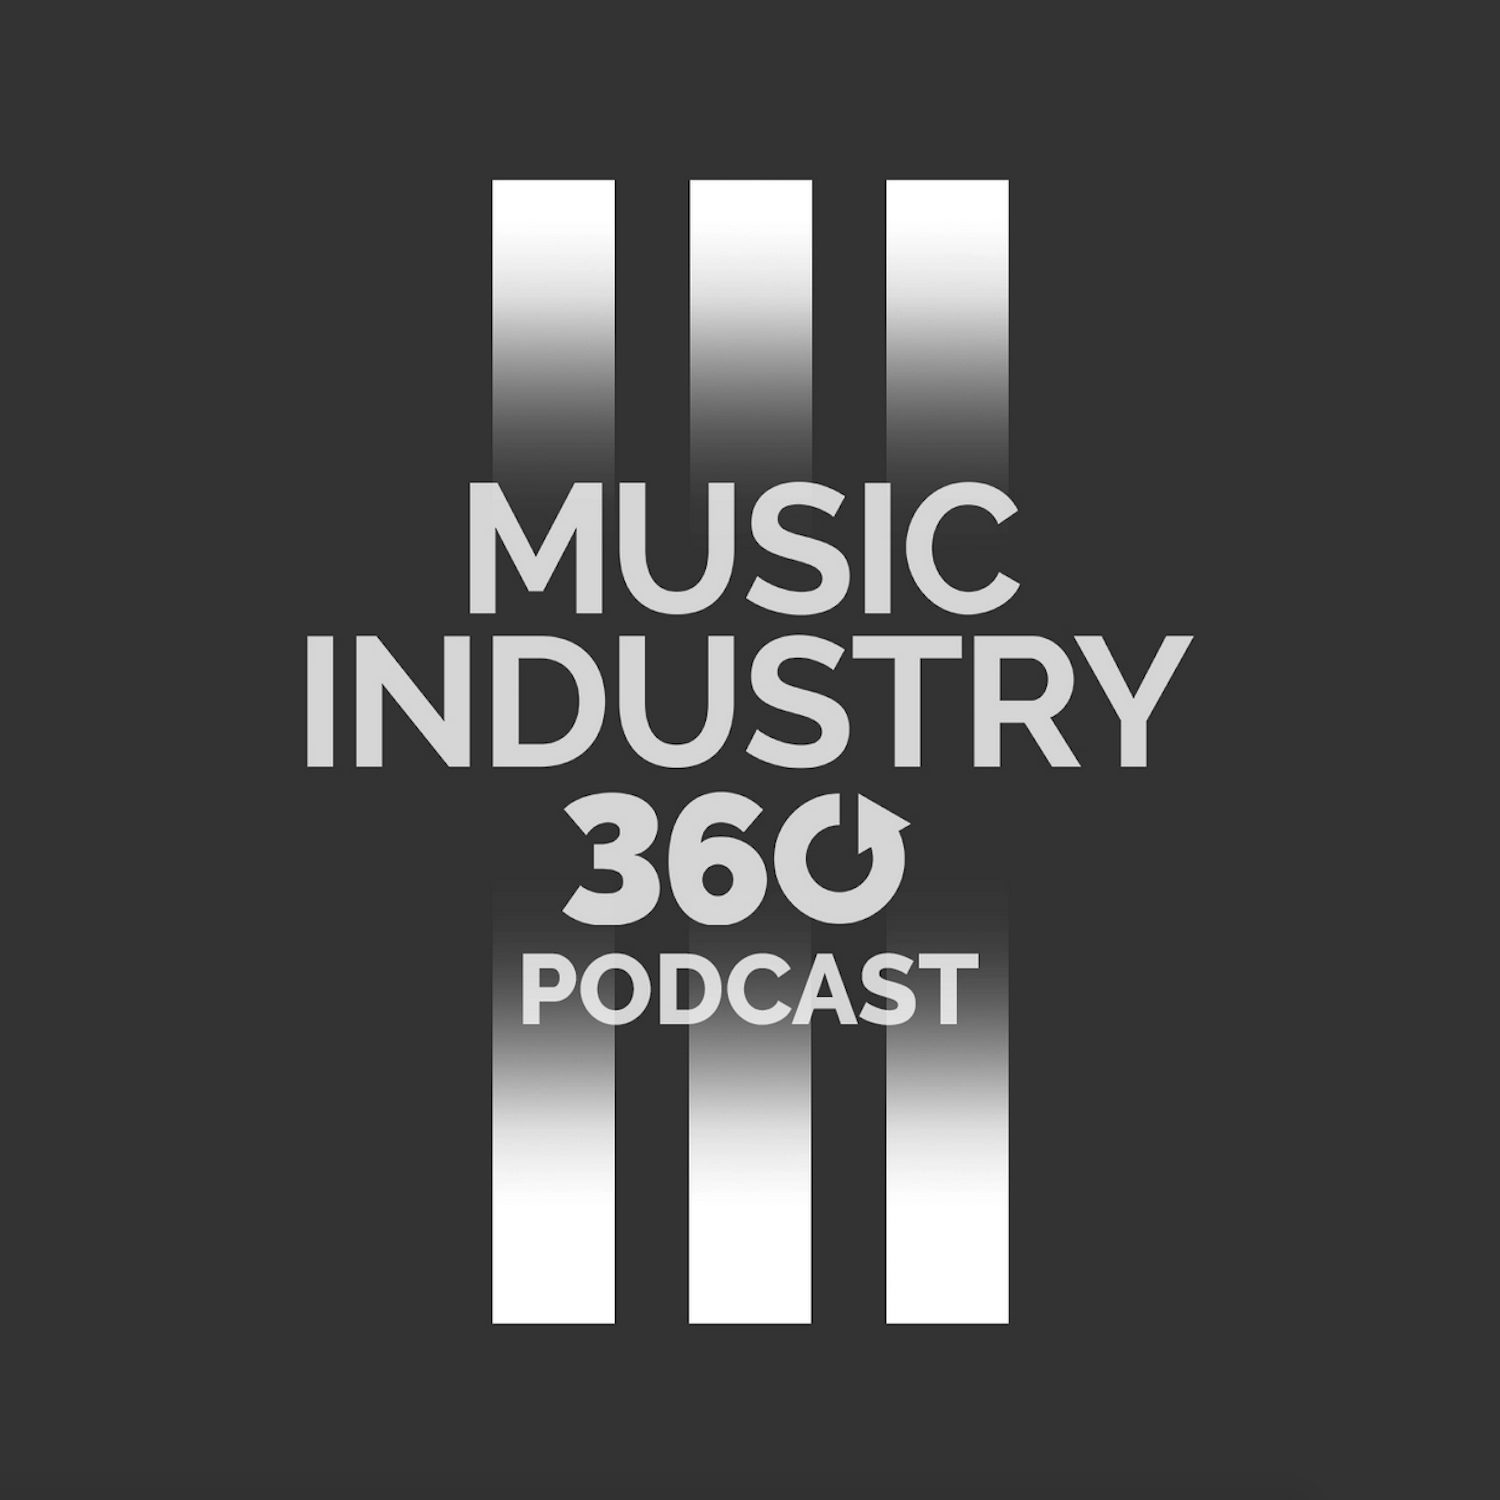 Music Distribution: How Has Music Distribution Changed? | Music Industry 360 Podcast